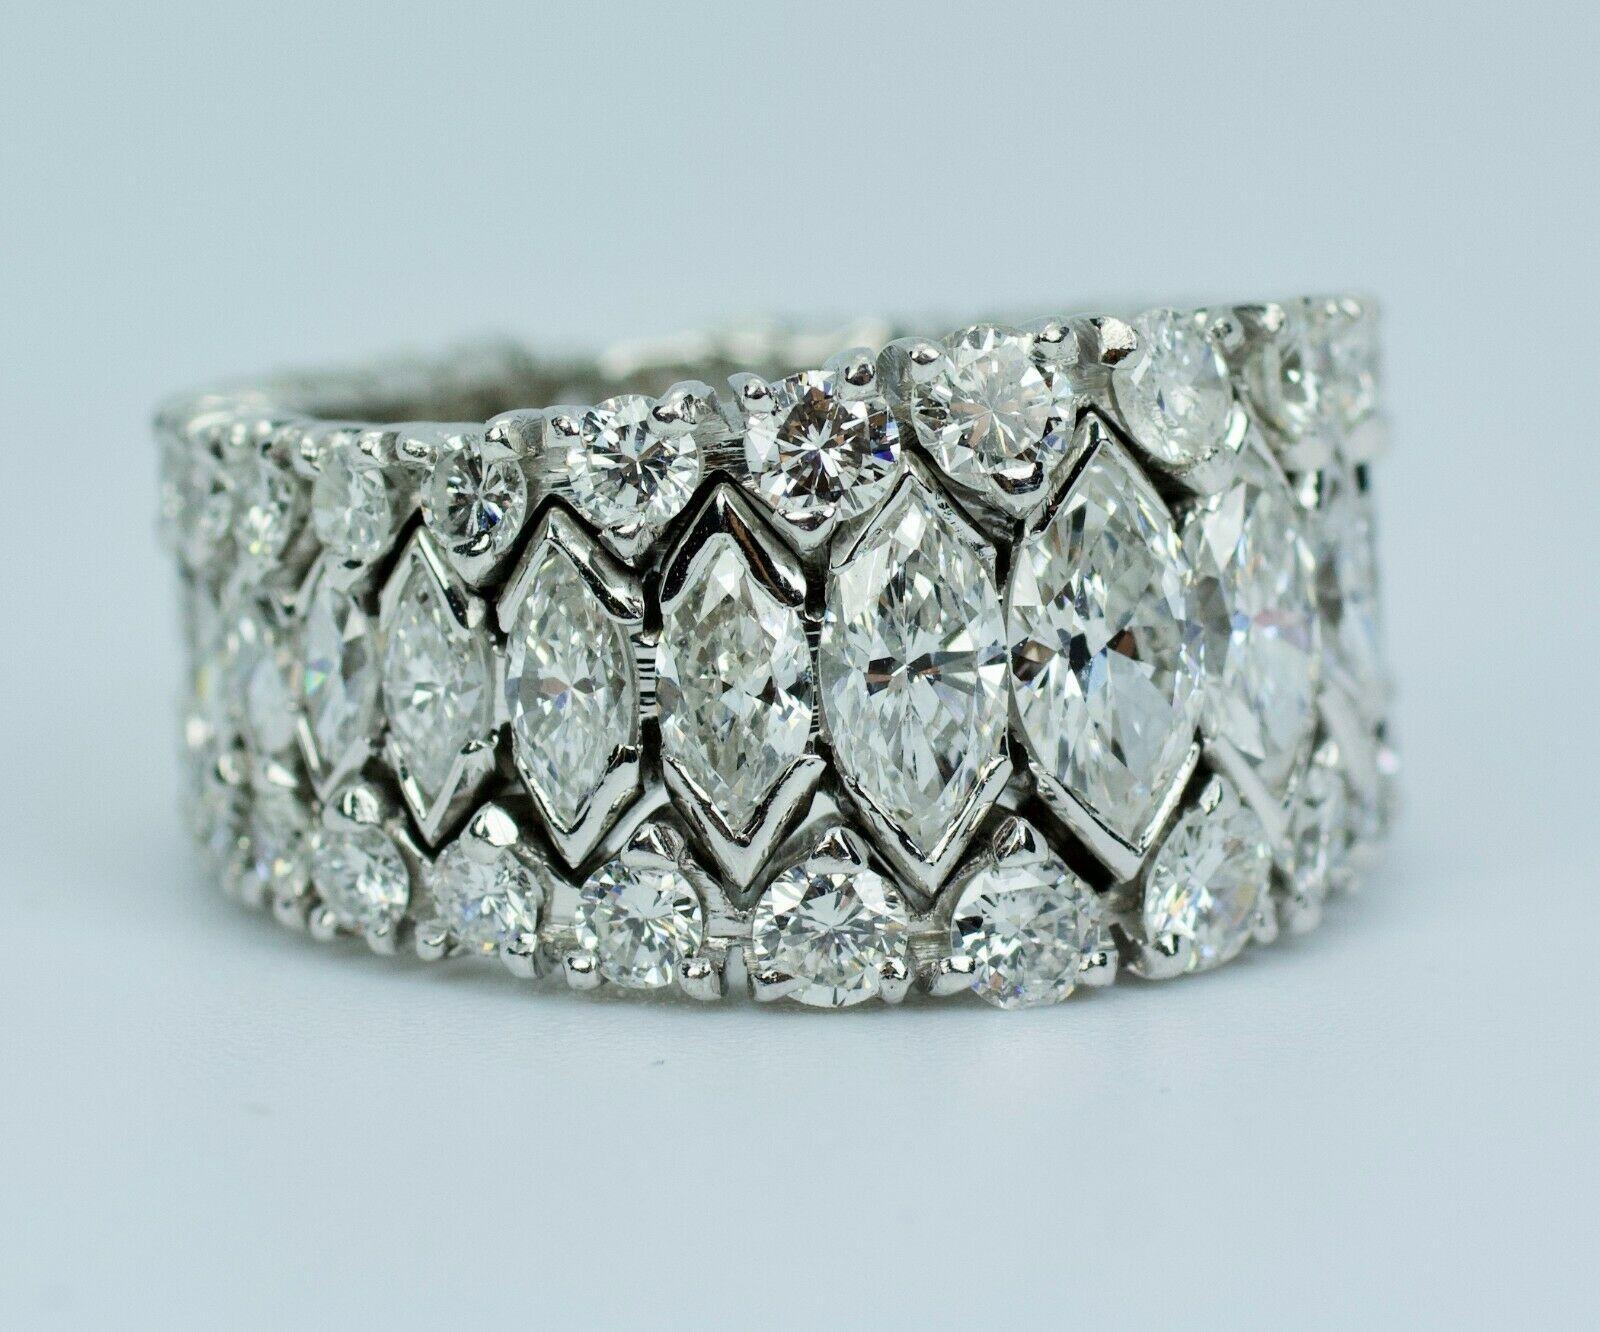 Platinum Round And Marquise Cut Diamonds Eternity Band 
12.1 Grams
Size 7.5
White Marquise Diamonds And Round Diamond 
5 Carats Total Weight 
Color: E-F 
Clarity: Vs
This is an absolutely STUNNING diamond ring. This piece is a real show stopper that